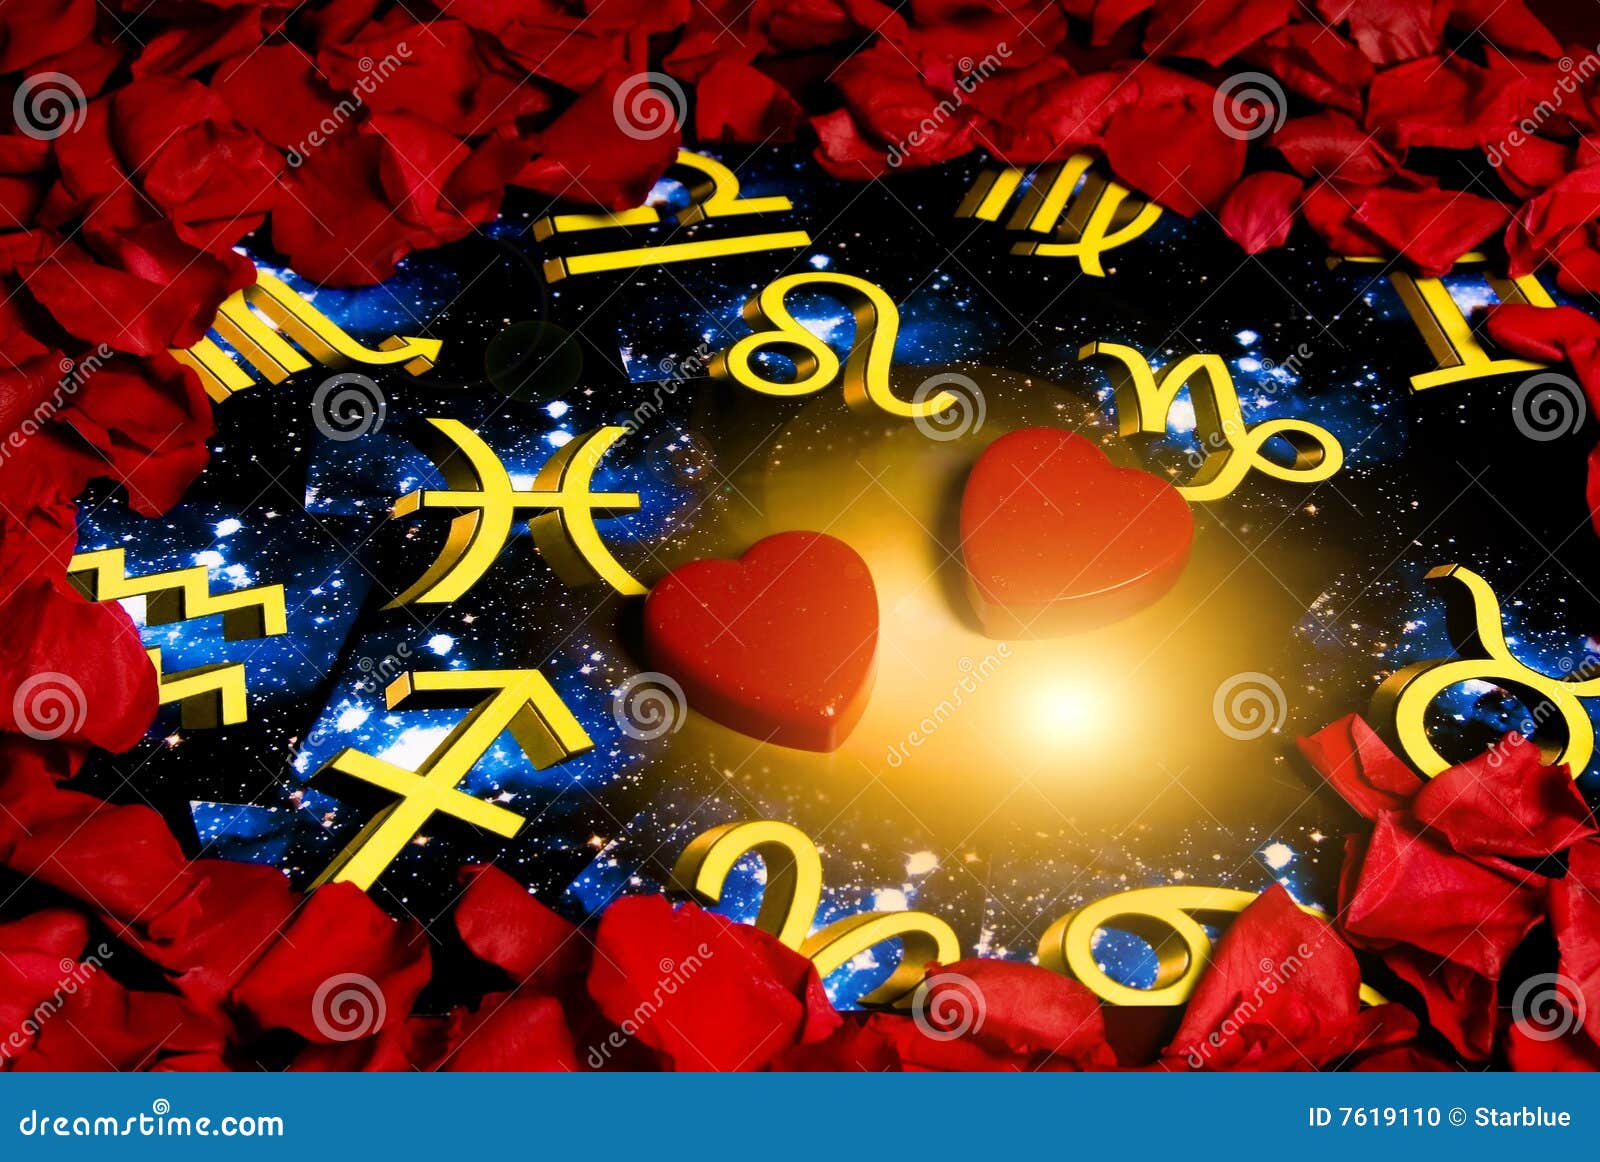 love and astrology